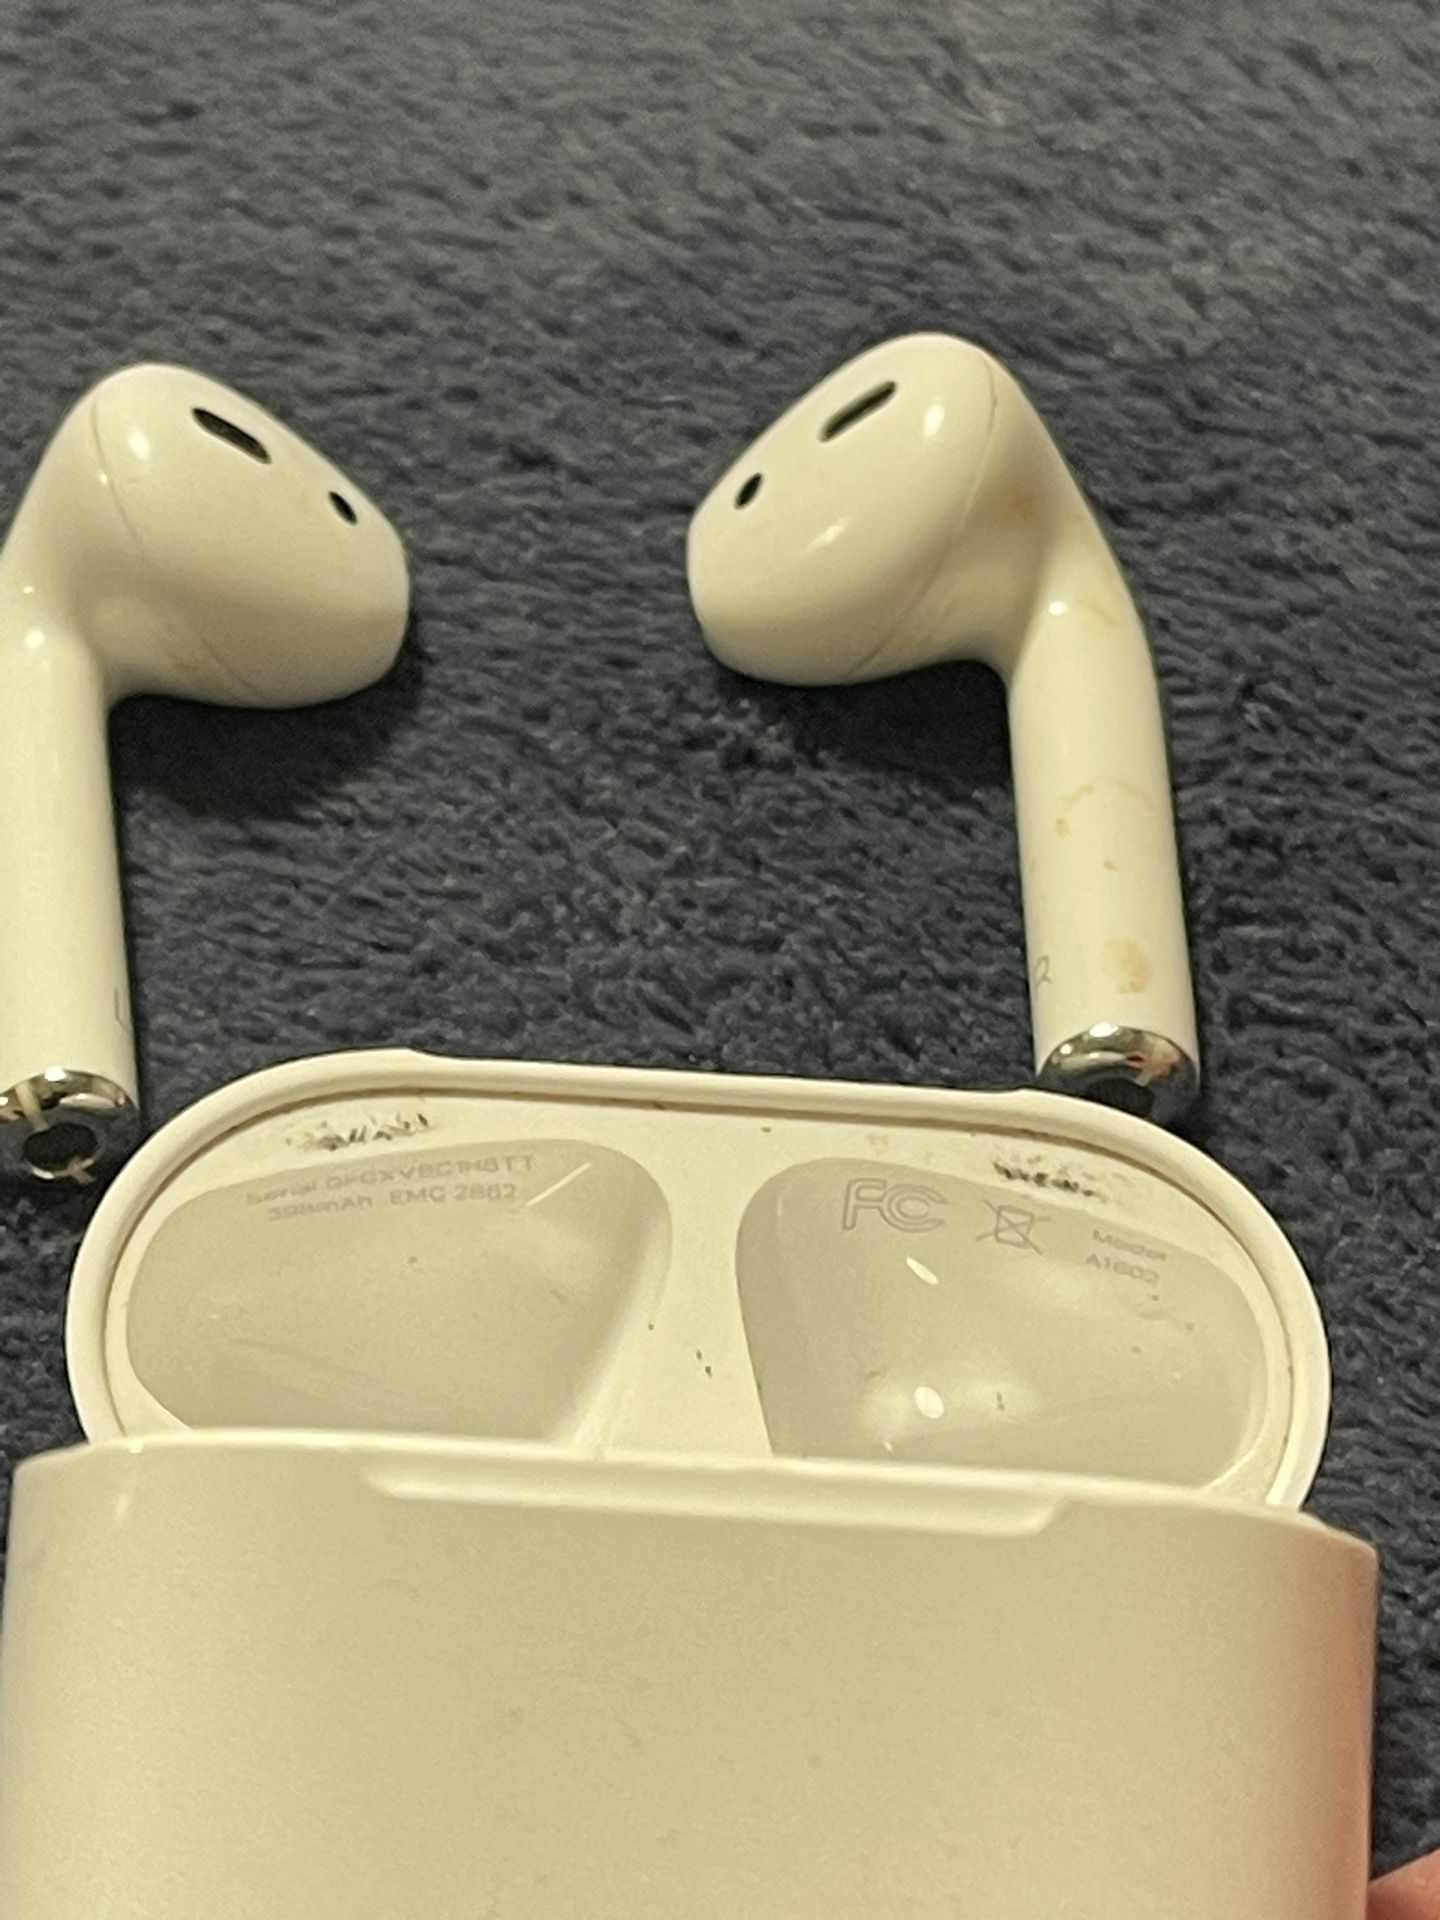 AirPods Second Generation In Good Condition Left AirPod Volume Is Low 